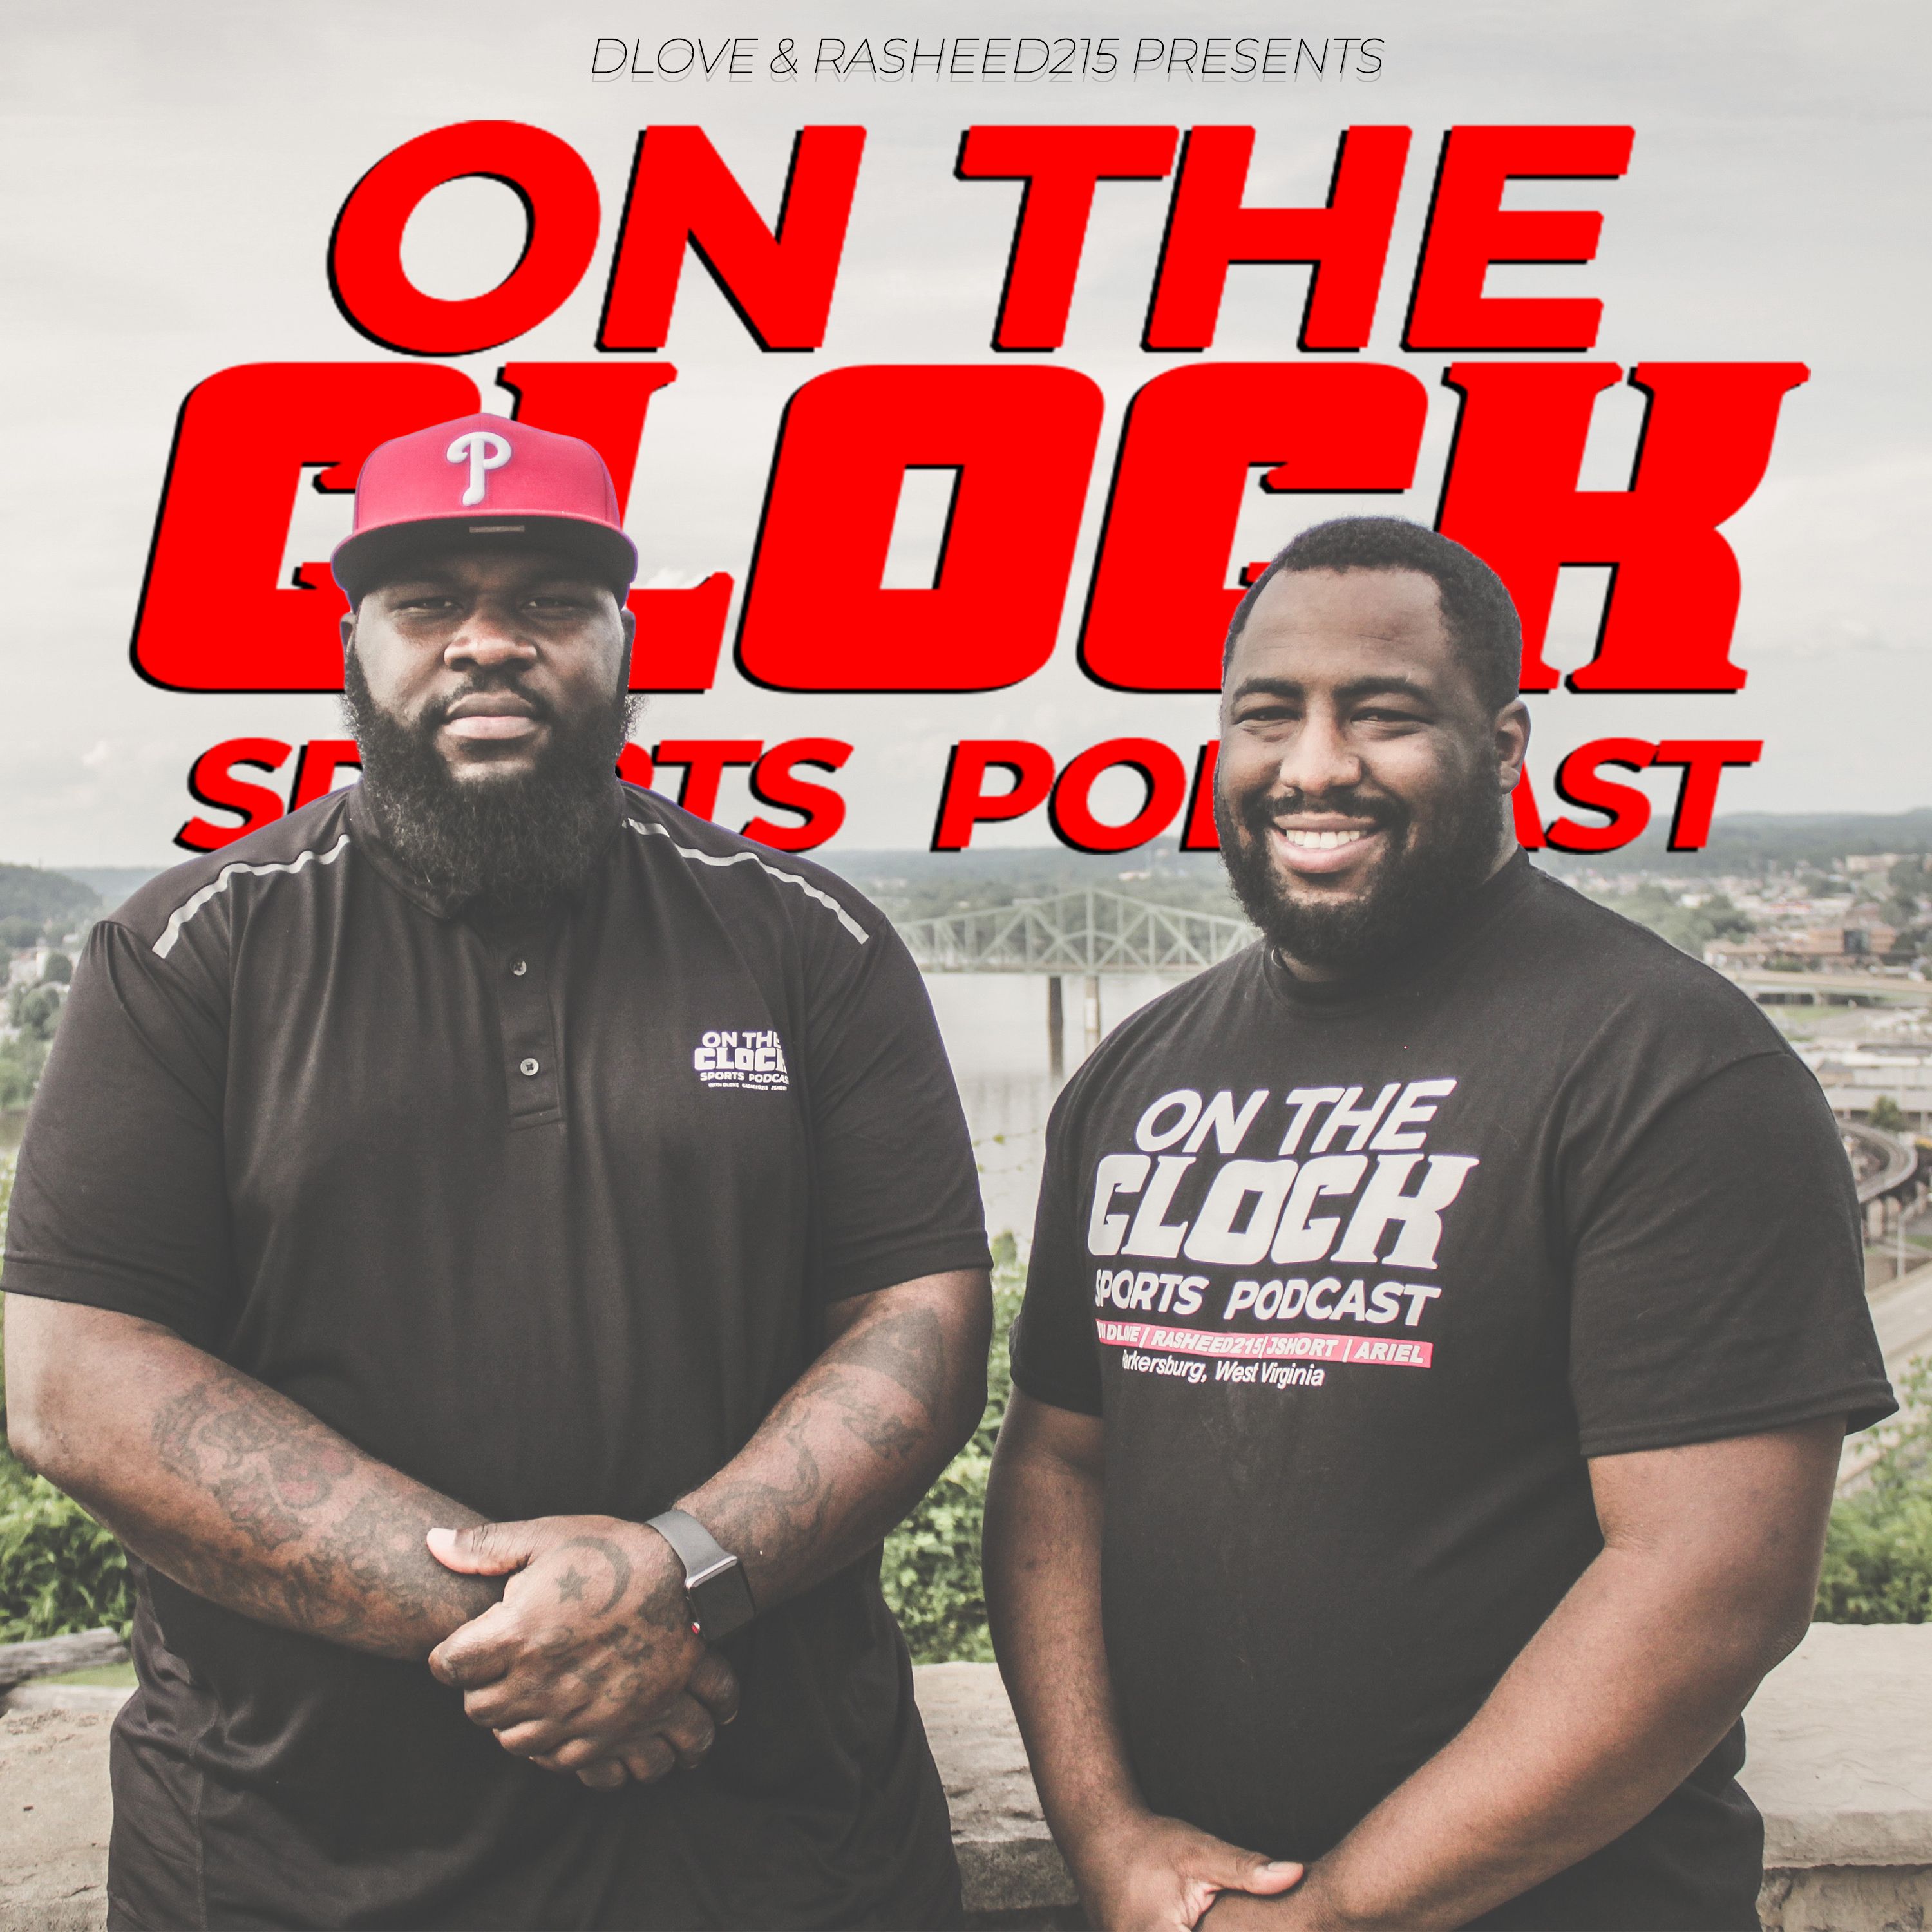 On The Clock Sports Podcast